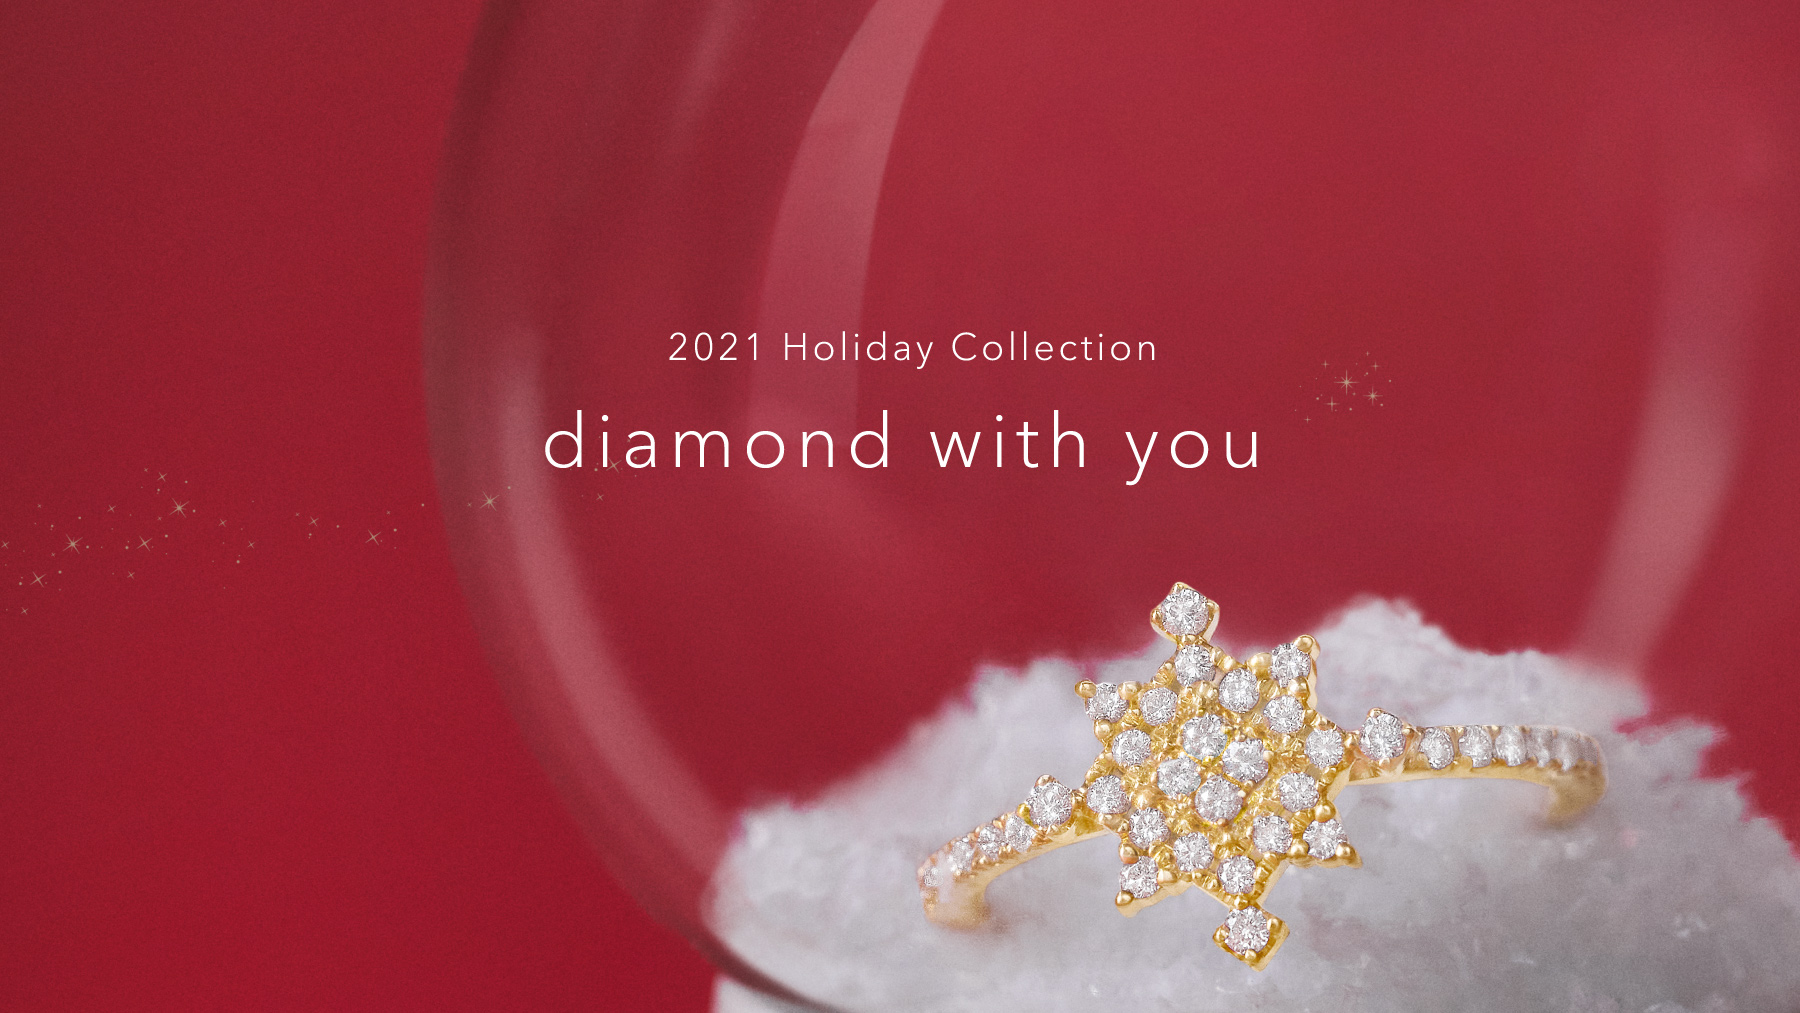 2021 Holiday Collection, diamond with you